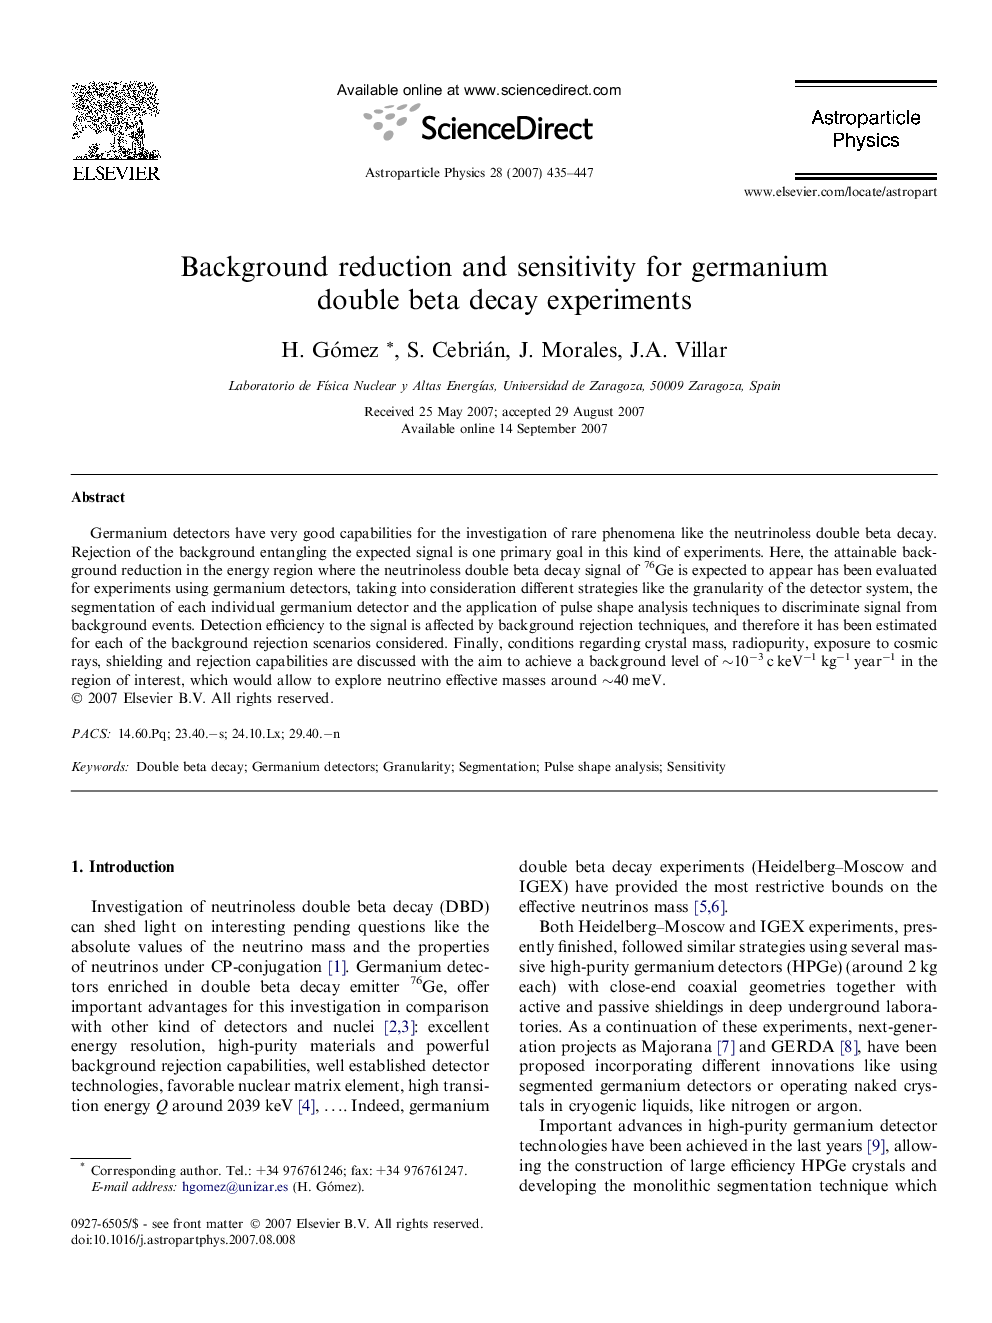 Background reduction and sensitivity for germanium double beta decay experiments